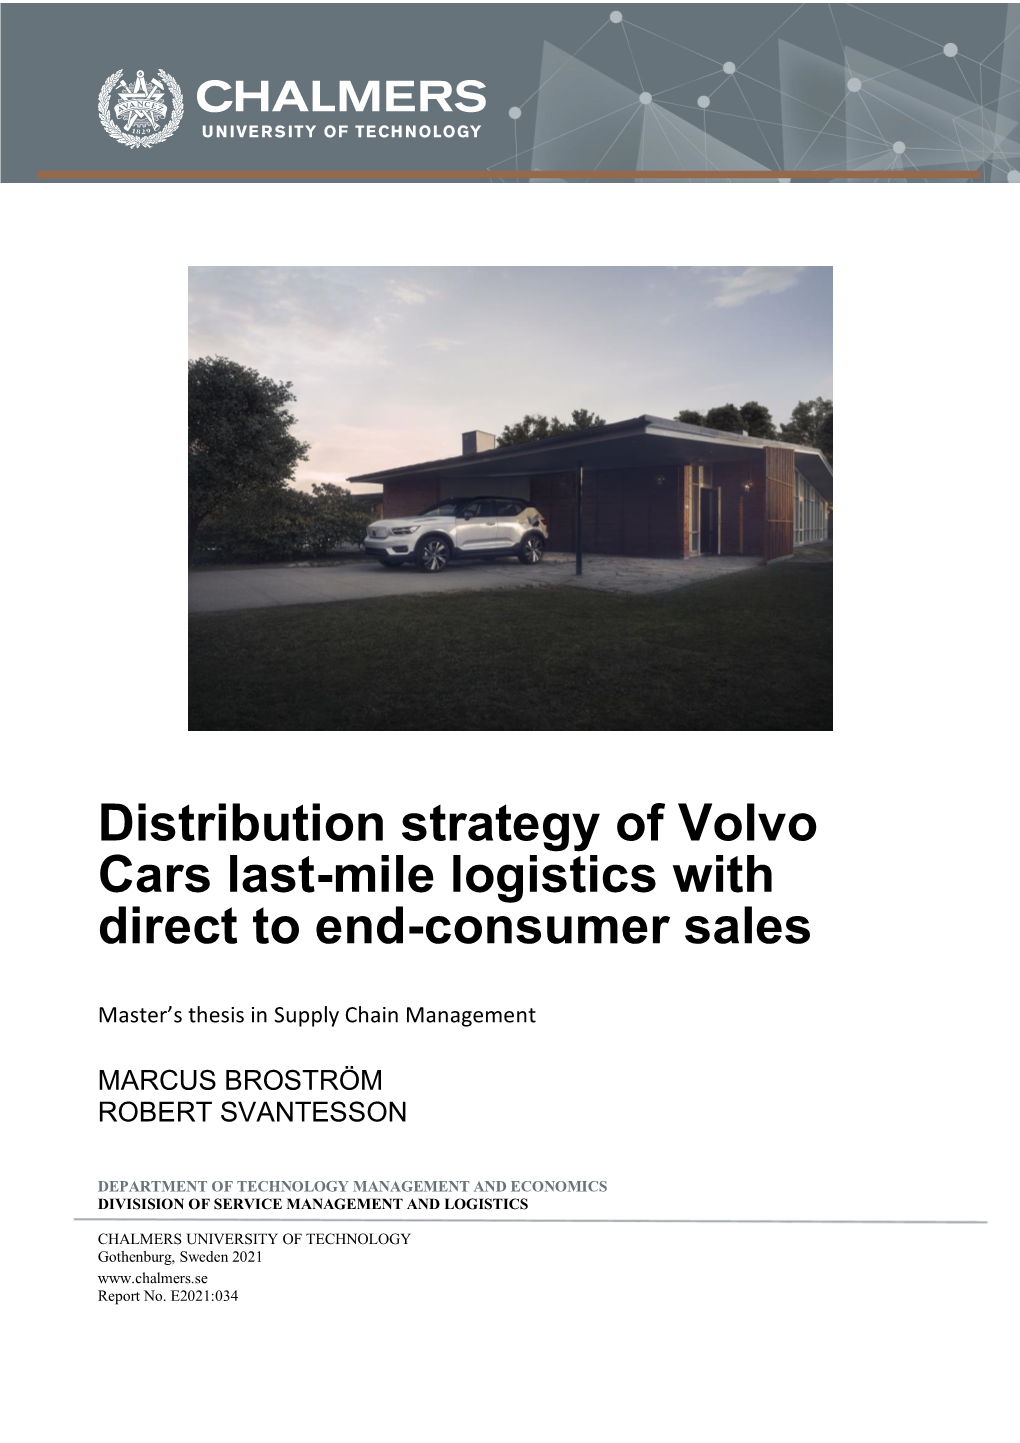 Distribution Strategy of Volvo Cars Last-Mile Logistics with Direct to End-Consumer Sales